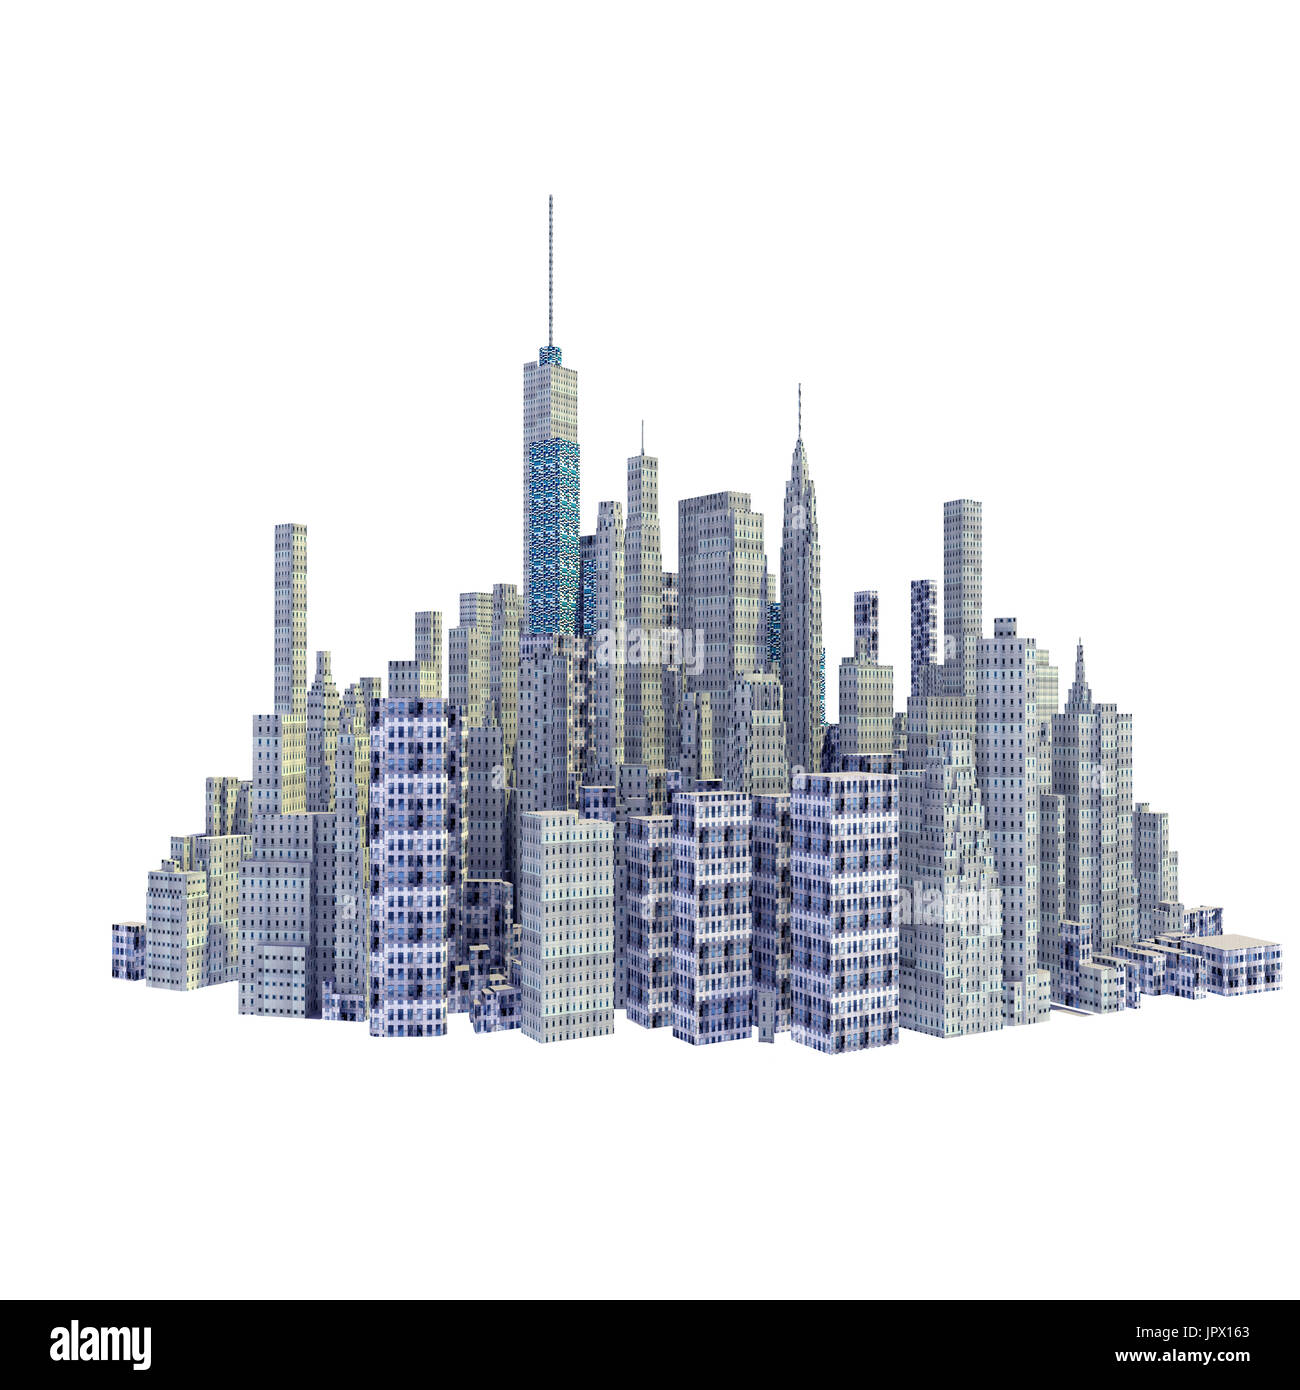 Rendered 3d city skyline isolated on white background Stock Photo